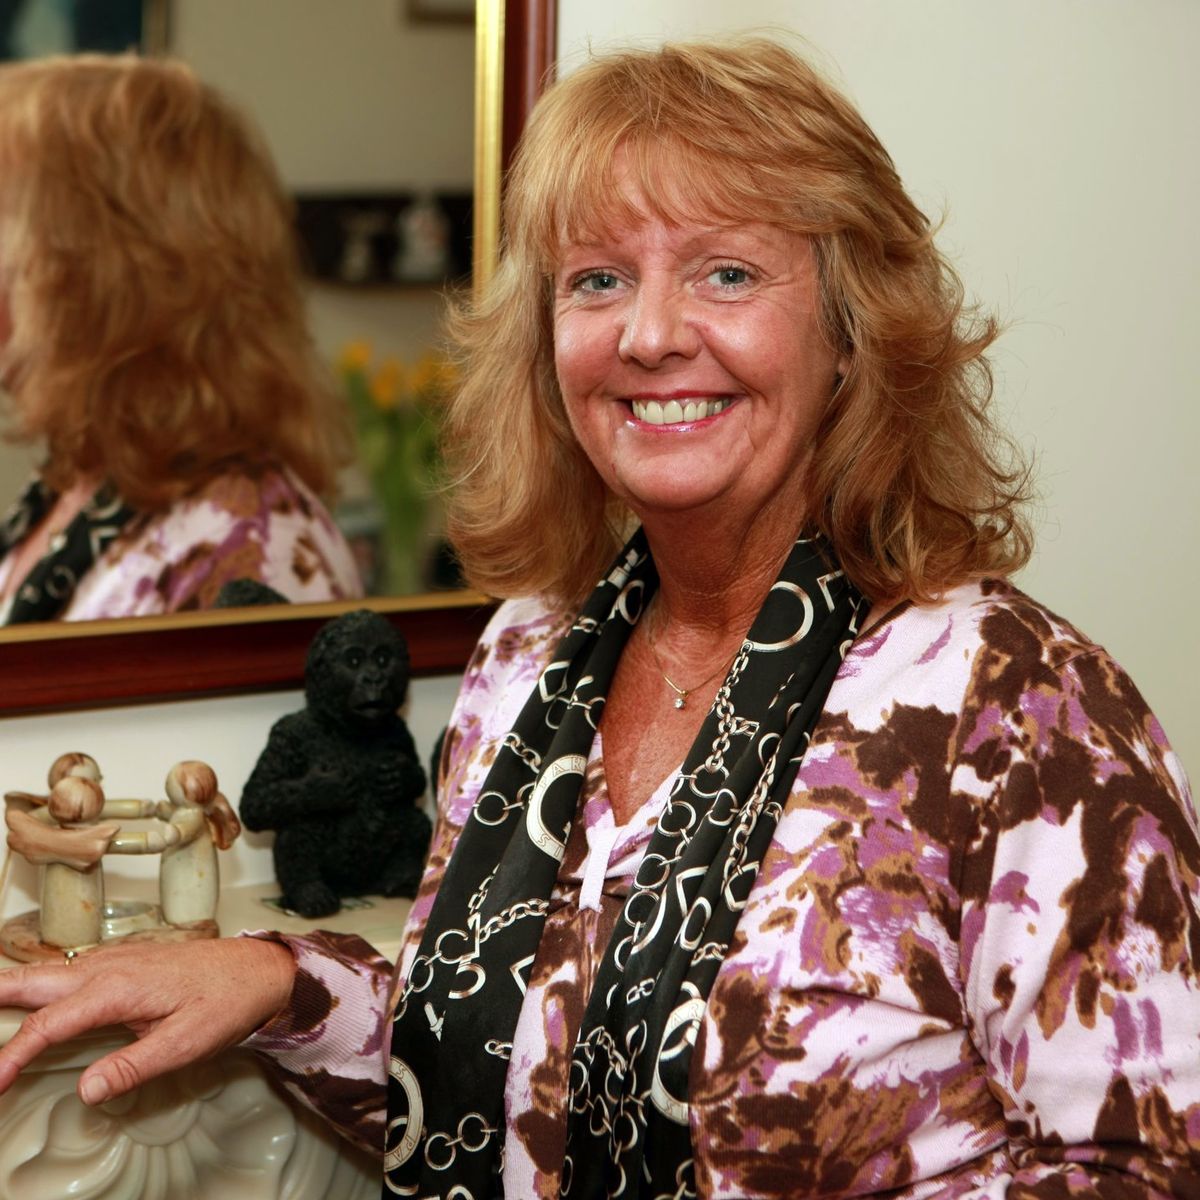 midlife woman helps people using psychics in Britain